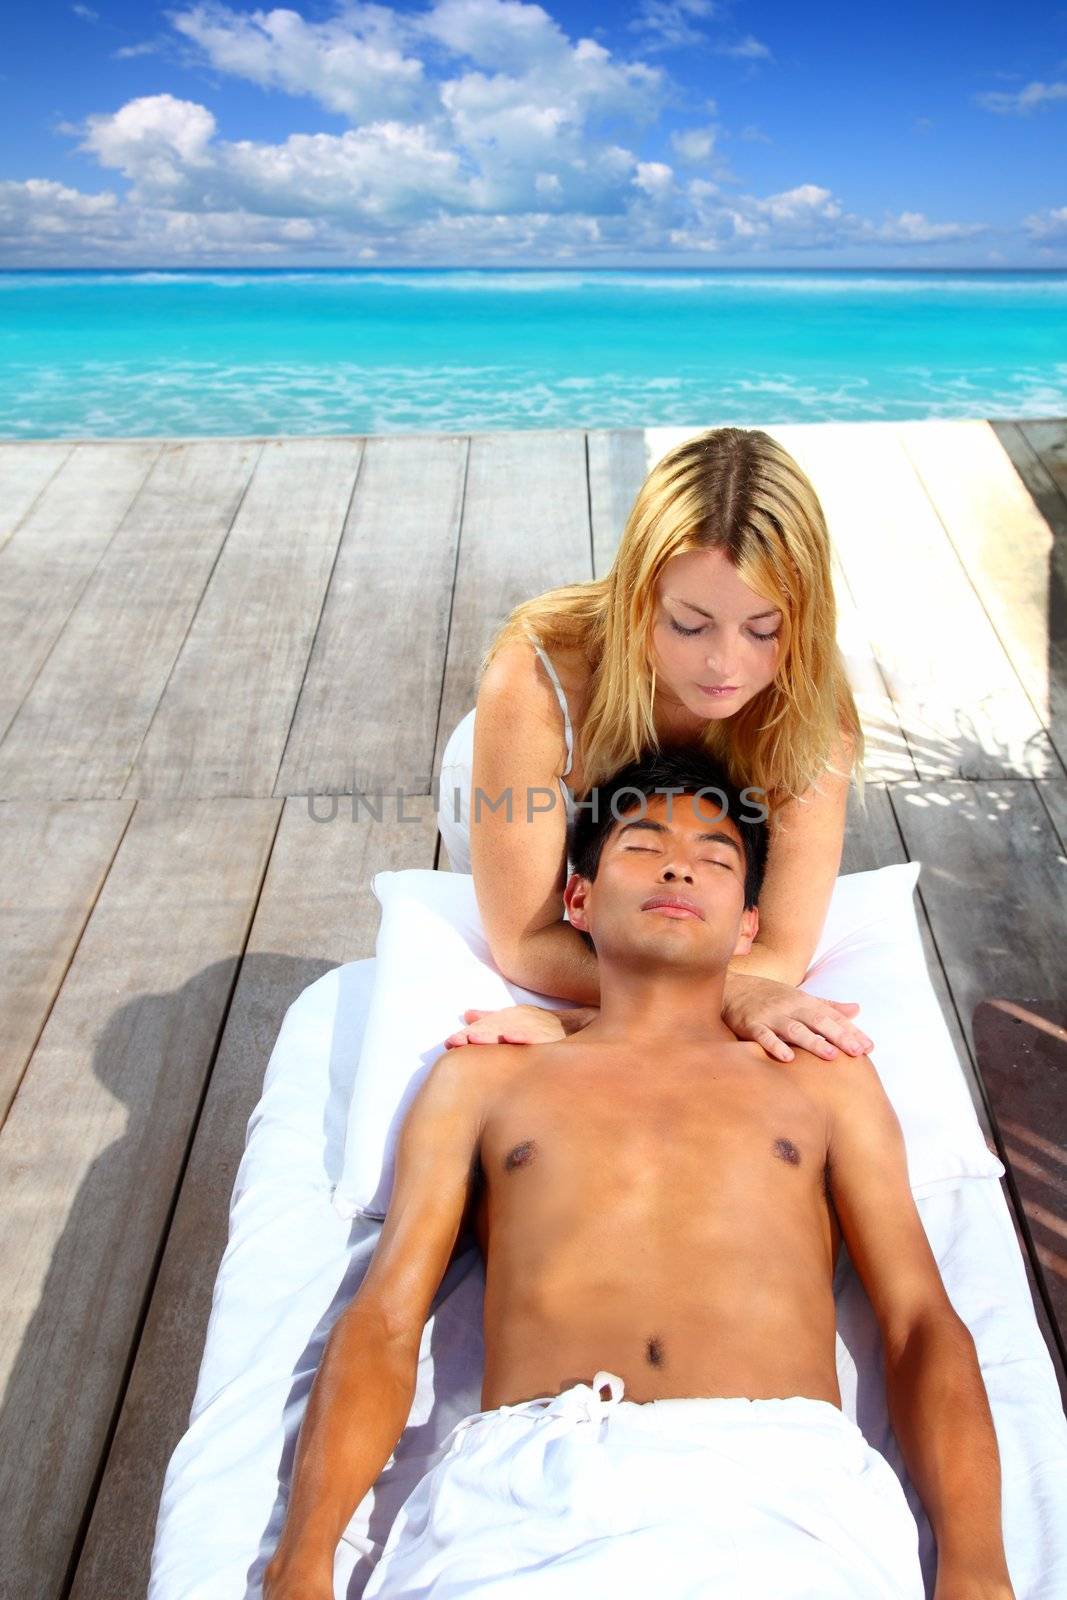 massage therapy stretch head neck outdoor Caribbean beach